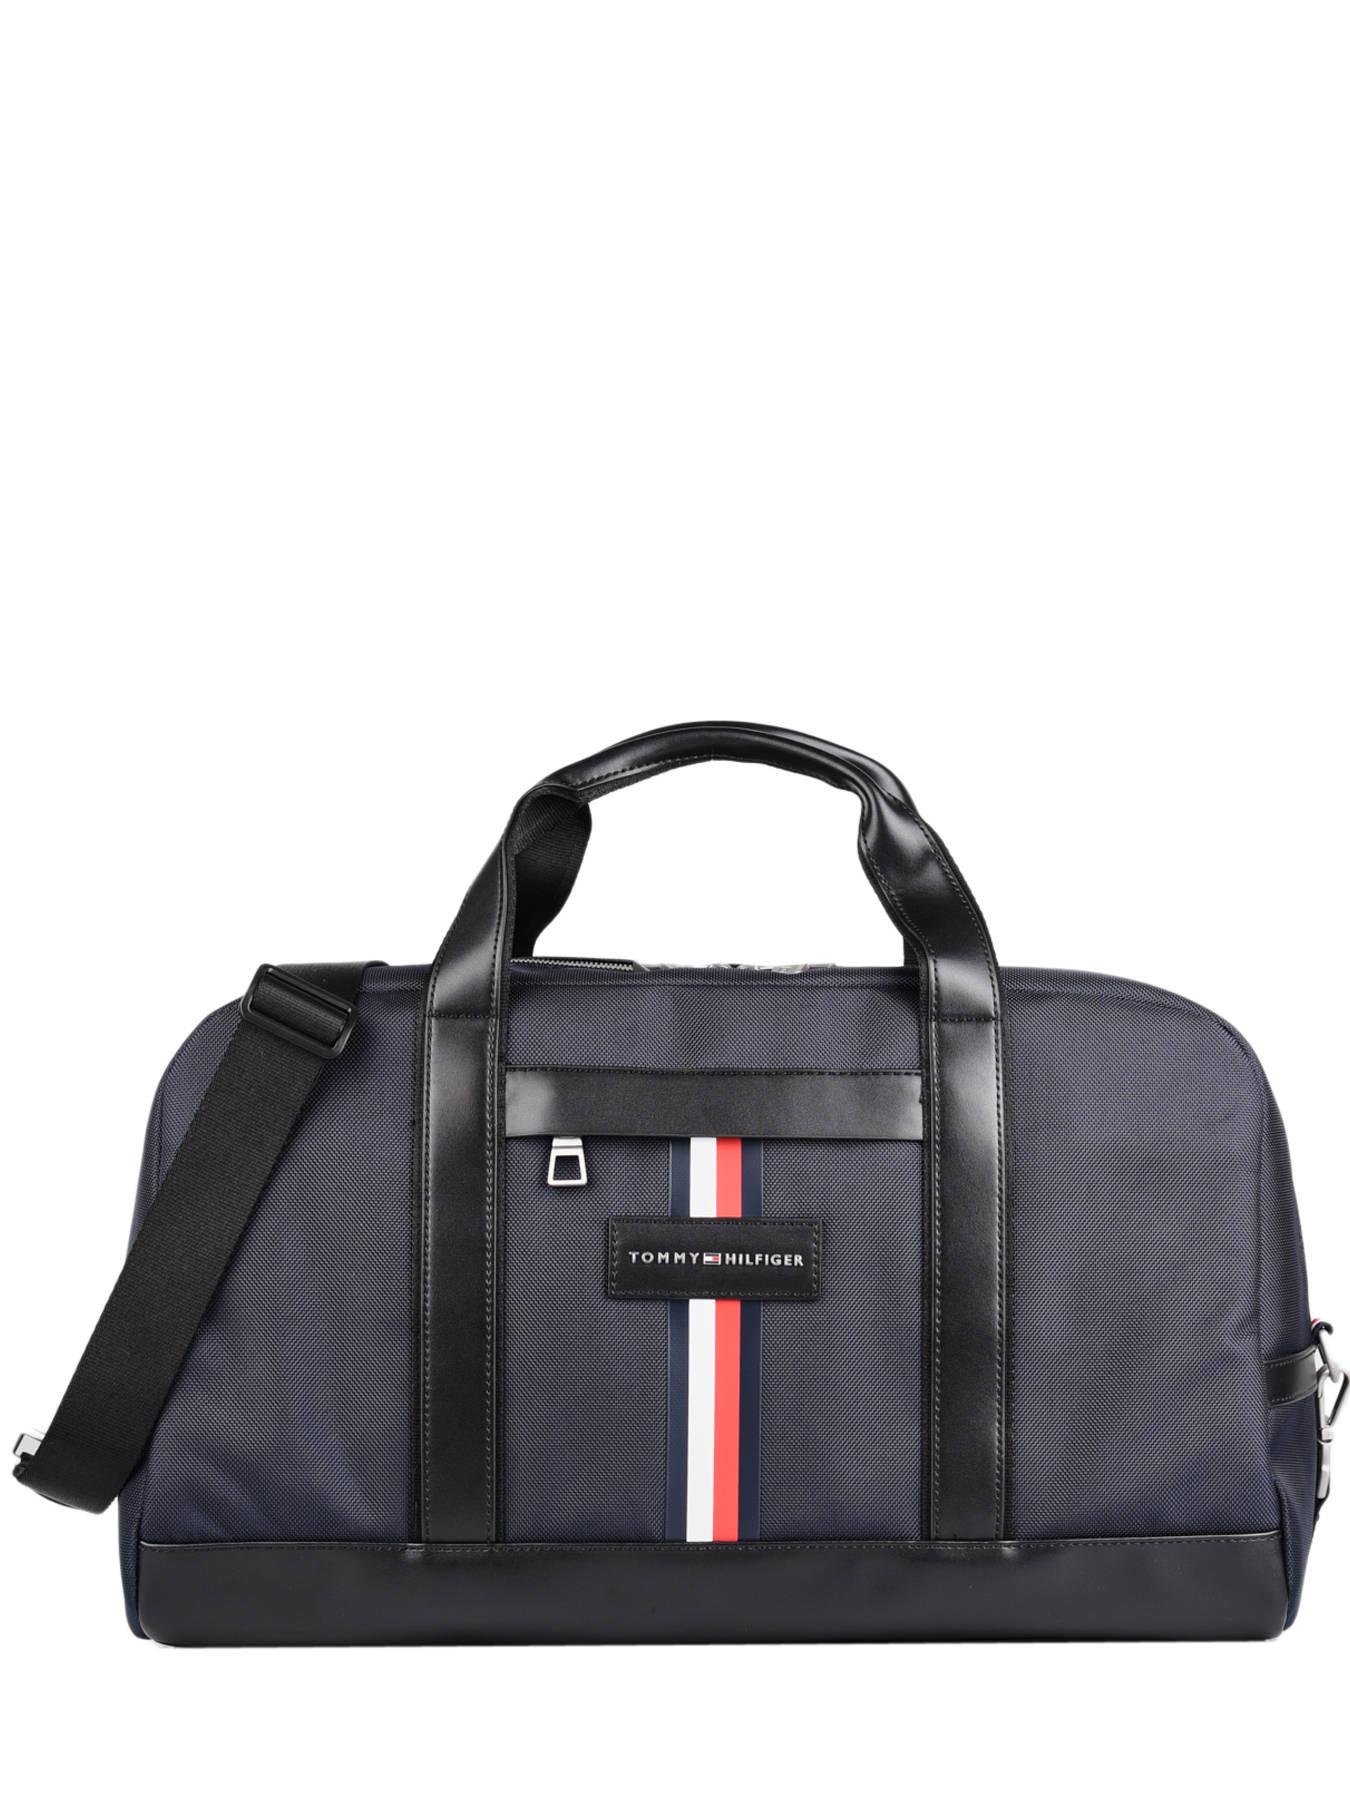 Tommy Hilfiger Carry on travel bag AM0AM06258 - best prices